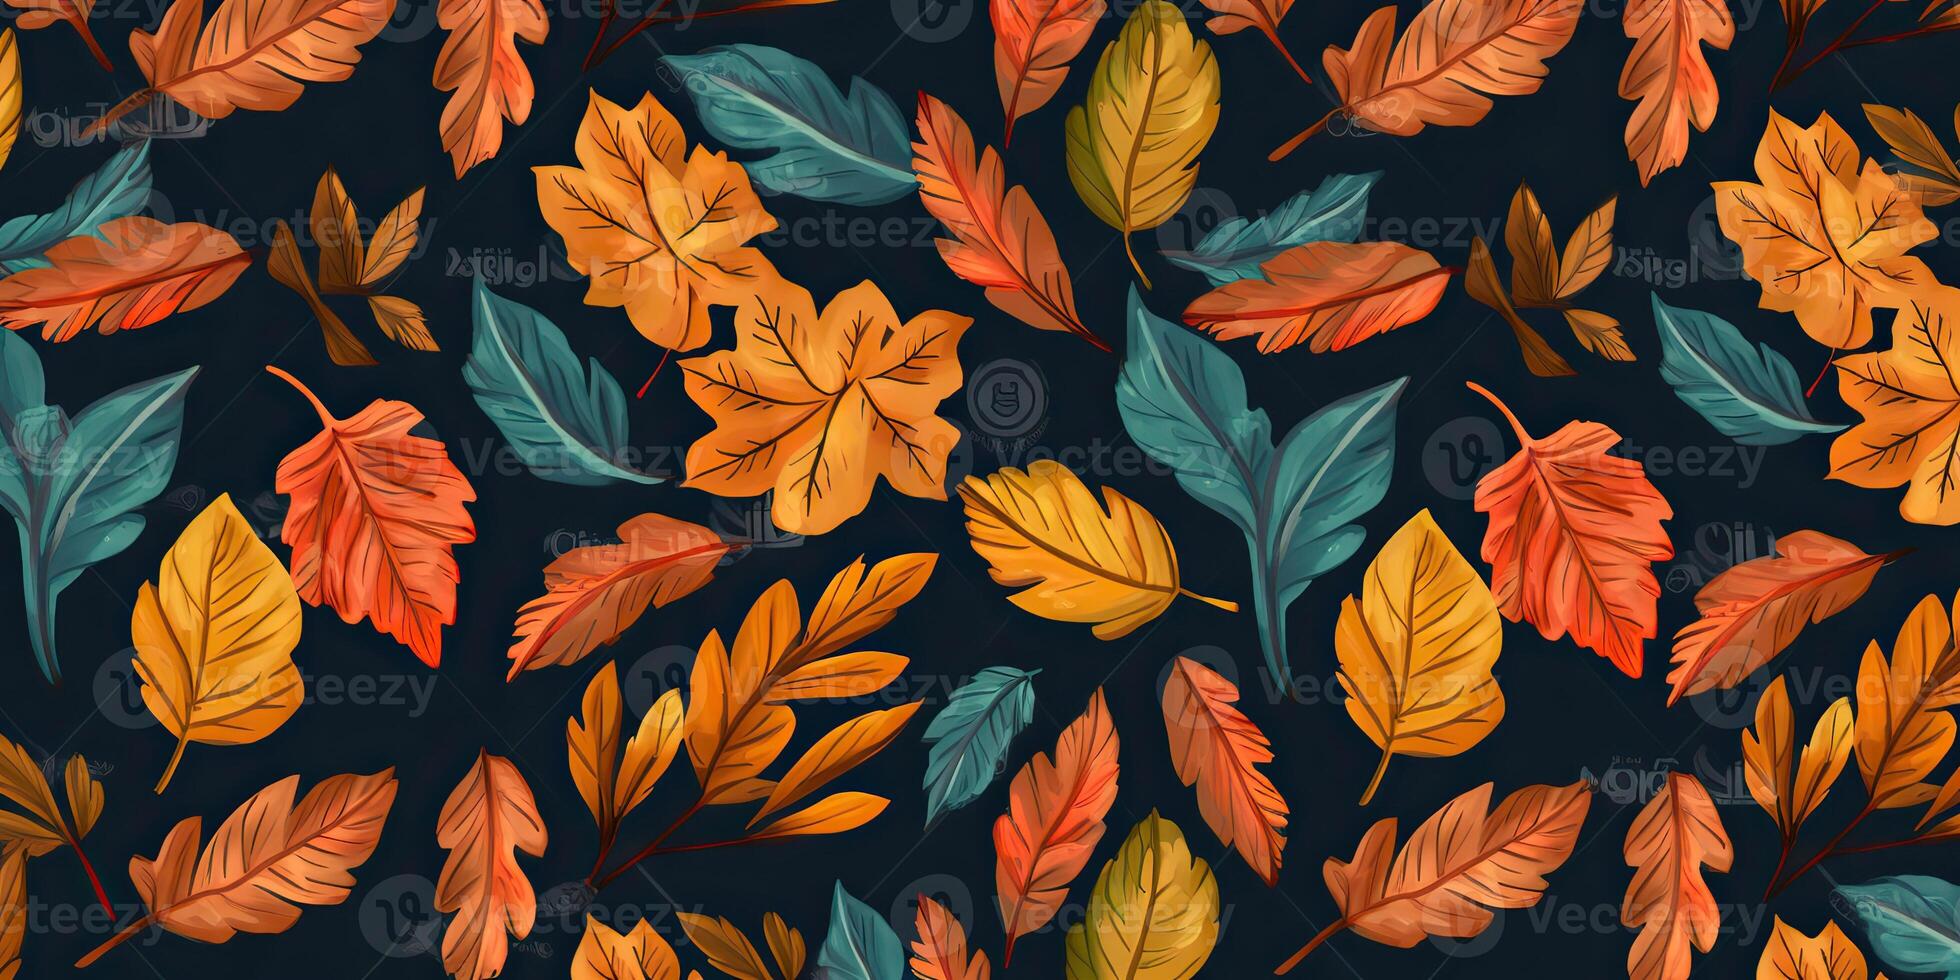 . . Autumn leafes background pattern. Can be used for graphic design or decoration. Grphic Art photo